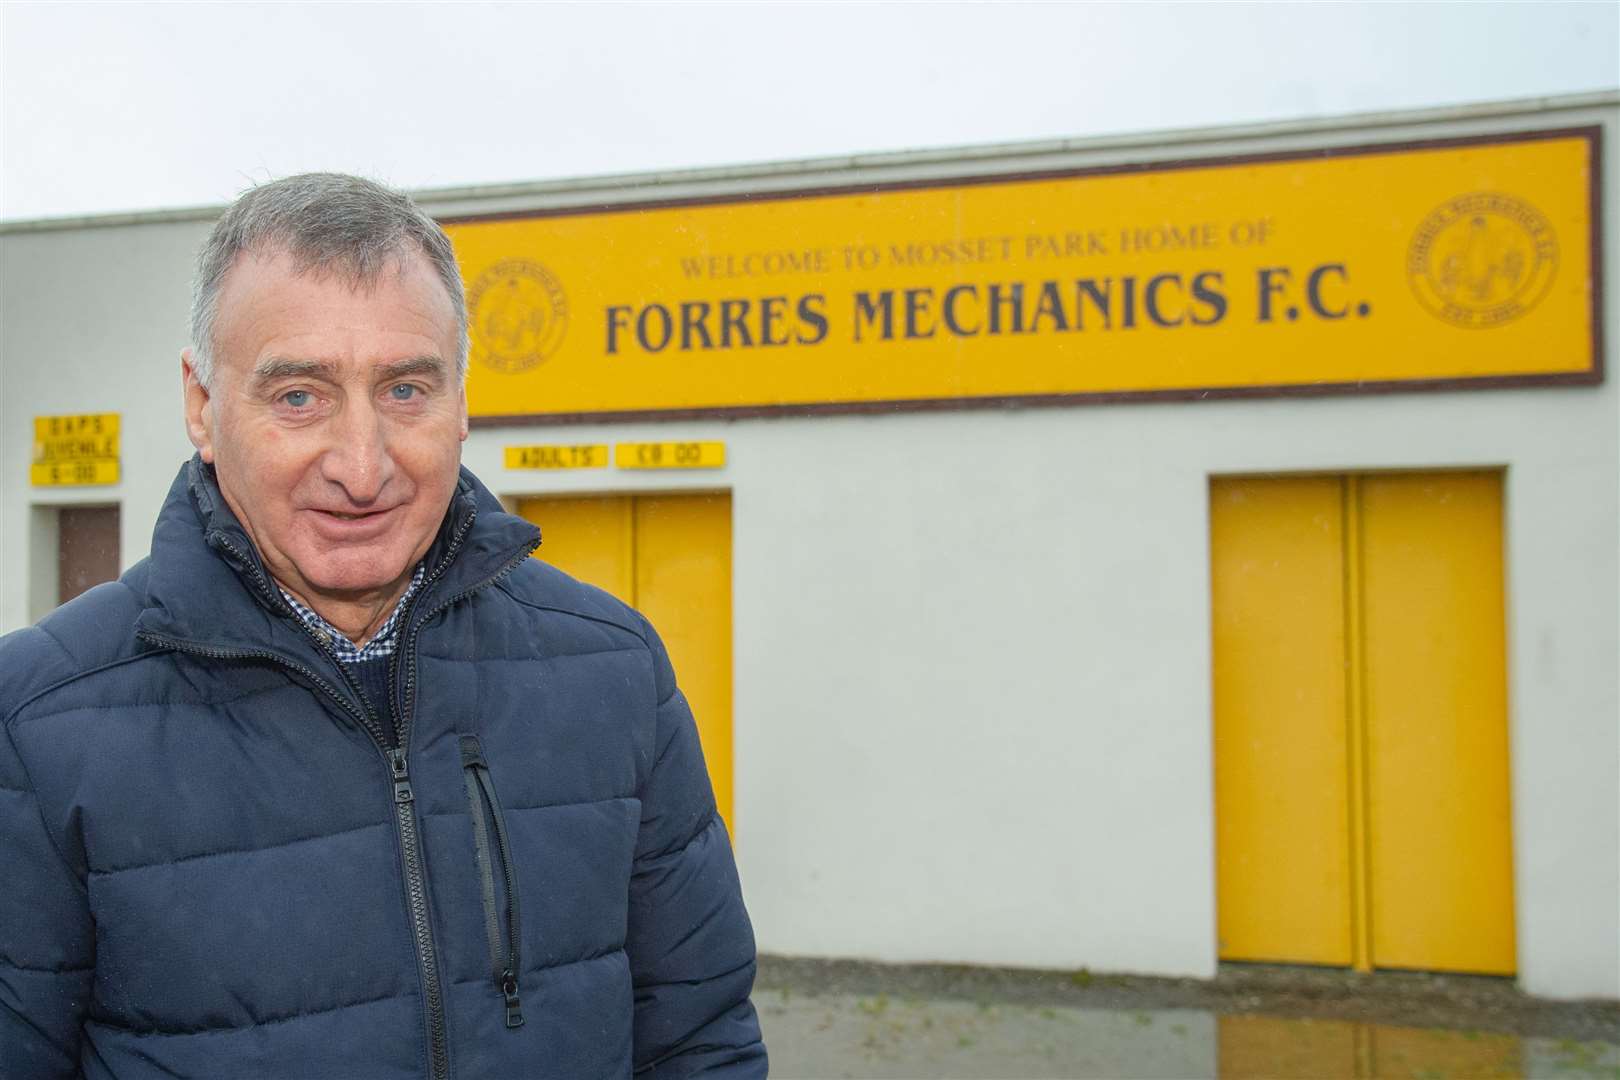 Dave Macdonald was announced as the new chairman of Forres Mechanics after the departure of the long-serving Doc Anderson.